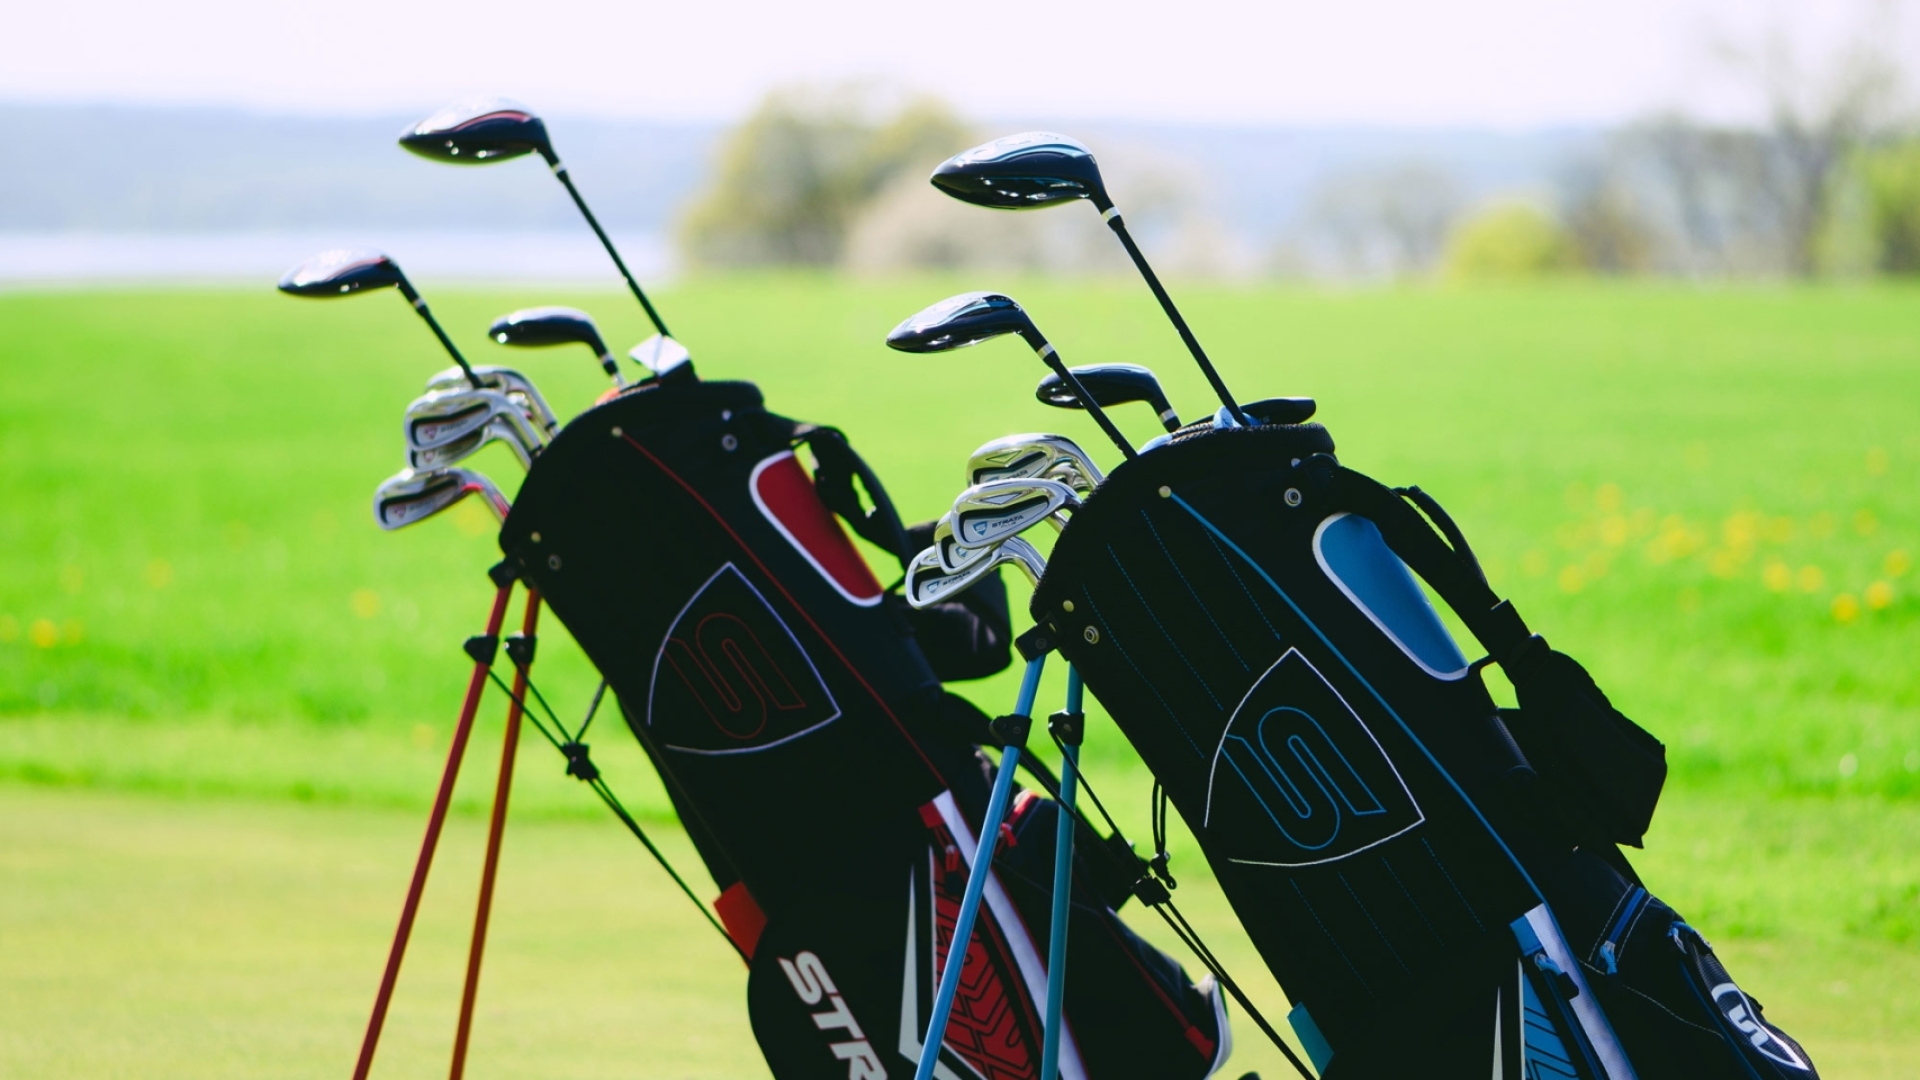 Pair of golf clubs and bags on green course.